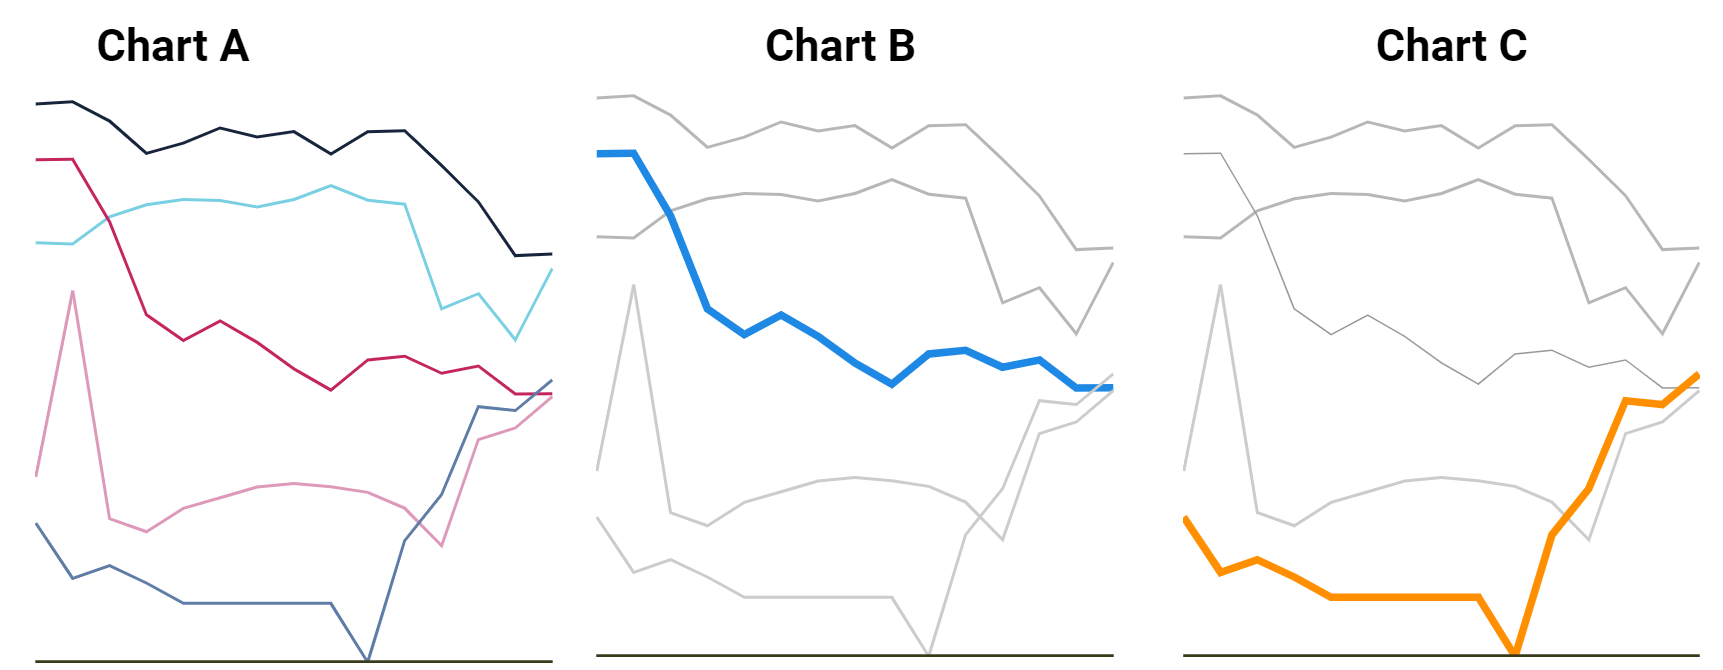 3 charts of identical data, with different lines weighted for emphasis